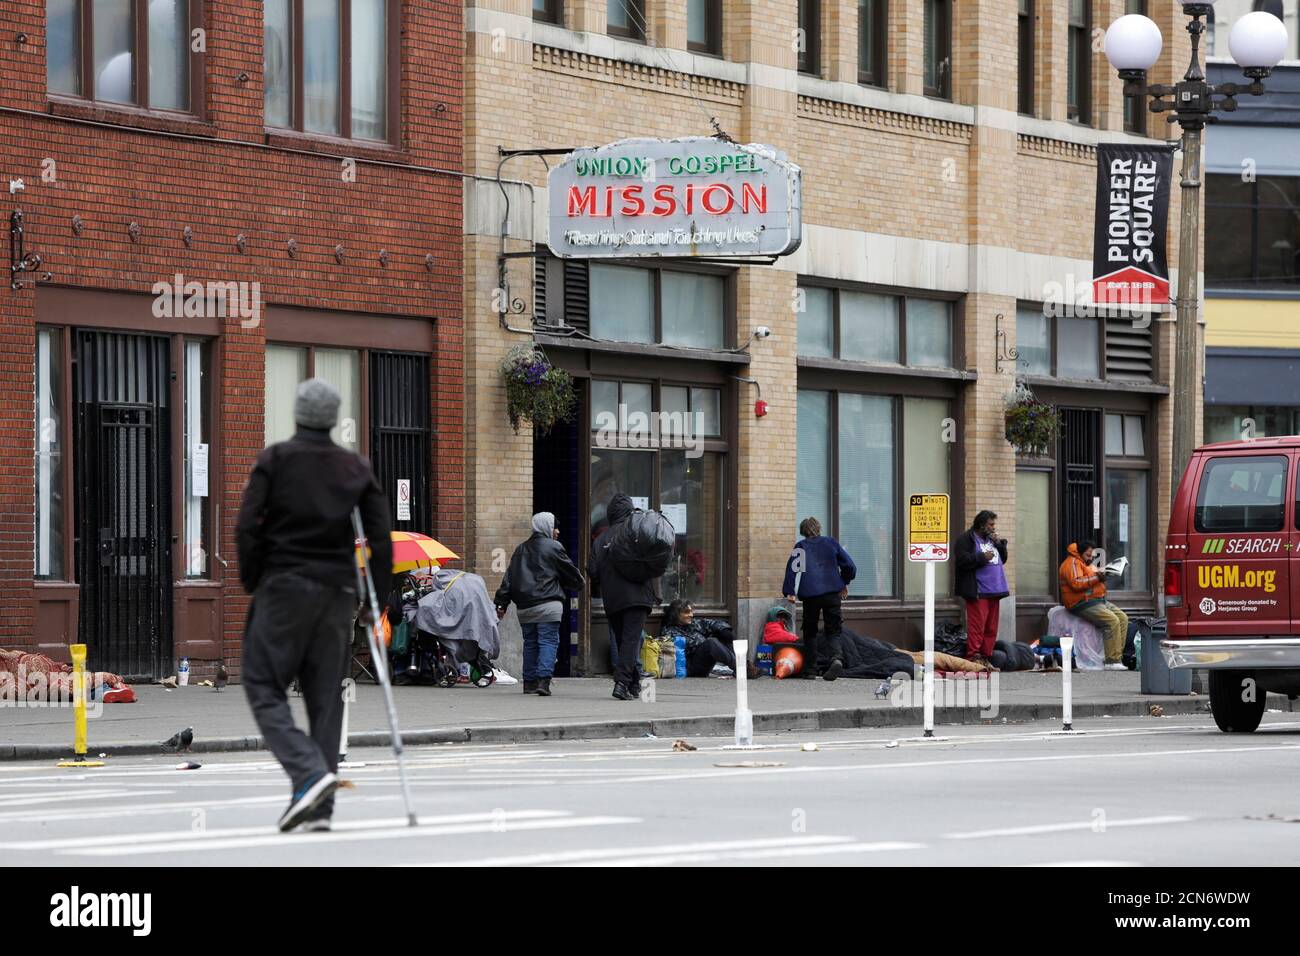 People are pictured outside the Union Gospel Mission Men's Shelter in Pioneer Square, after a confirmed case of COVID-19 at their Riverton Place location led to a 14-day lockdown at all Mission Program sites, according to their website, as efforts continue to help slow the spread of coronavirus disease (COVID-19) in Seattle, Washington, U.S. March 28, 2020.  REUTERS/Jason Redmond Stock Photo